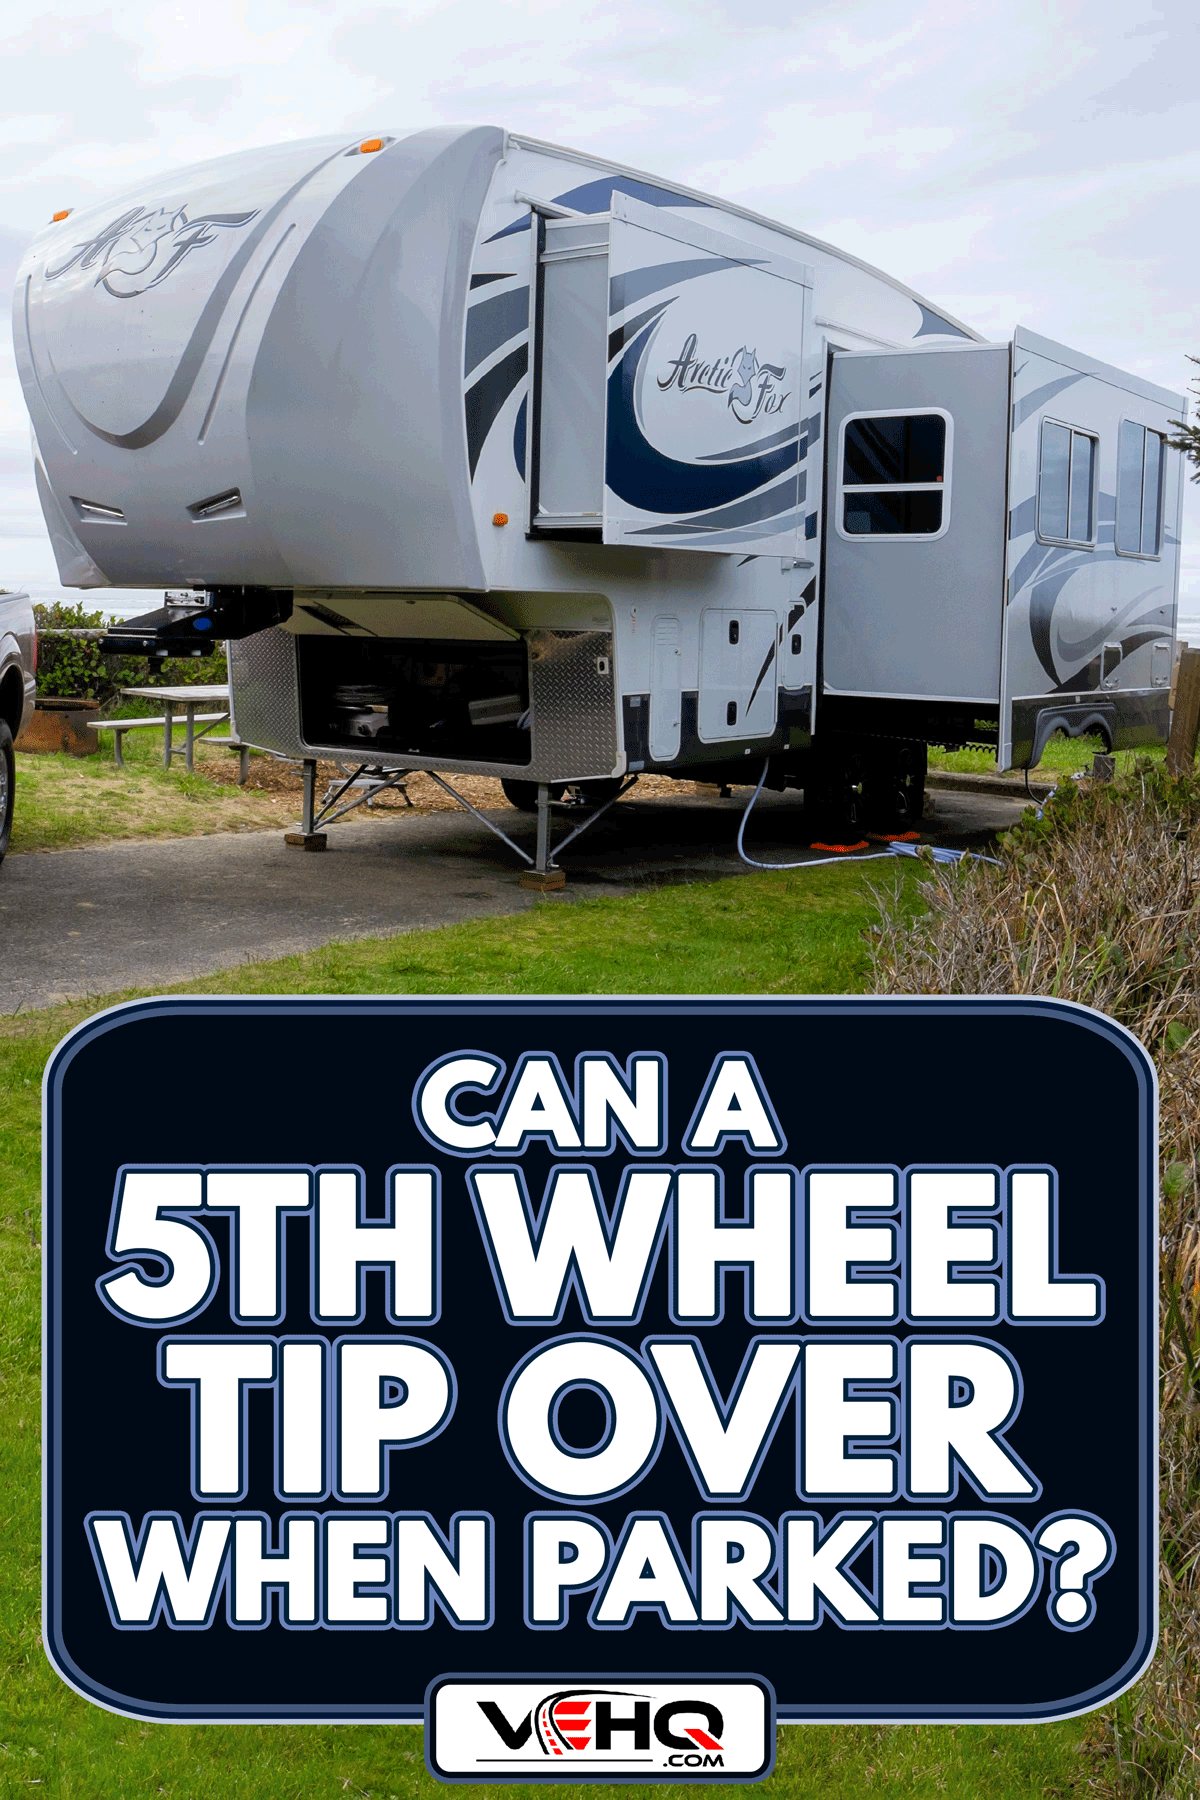 Campsite with a large Arctic Fox 5th Wheel, Can A 5th Wheel Tip Over When Parked?